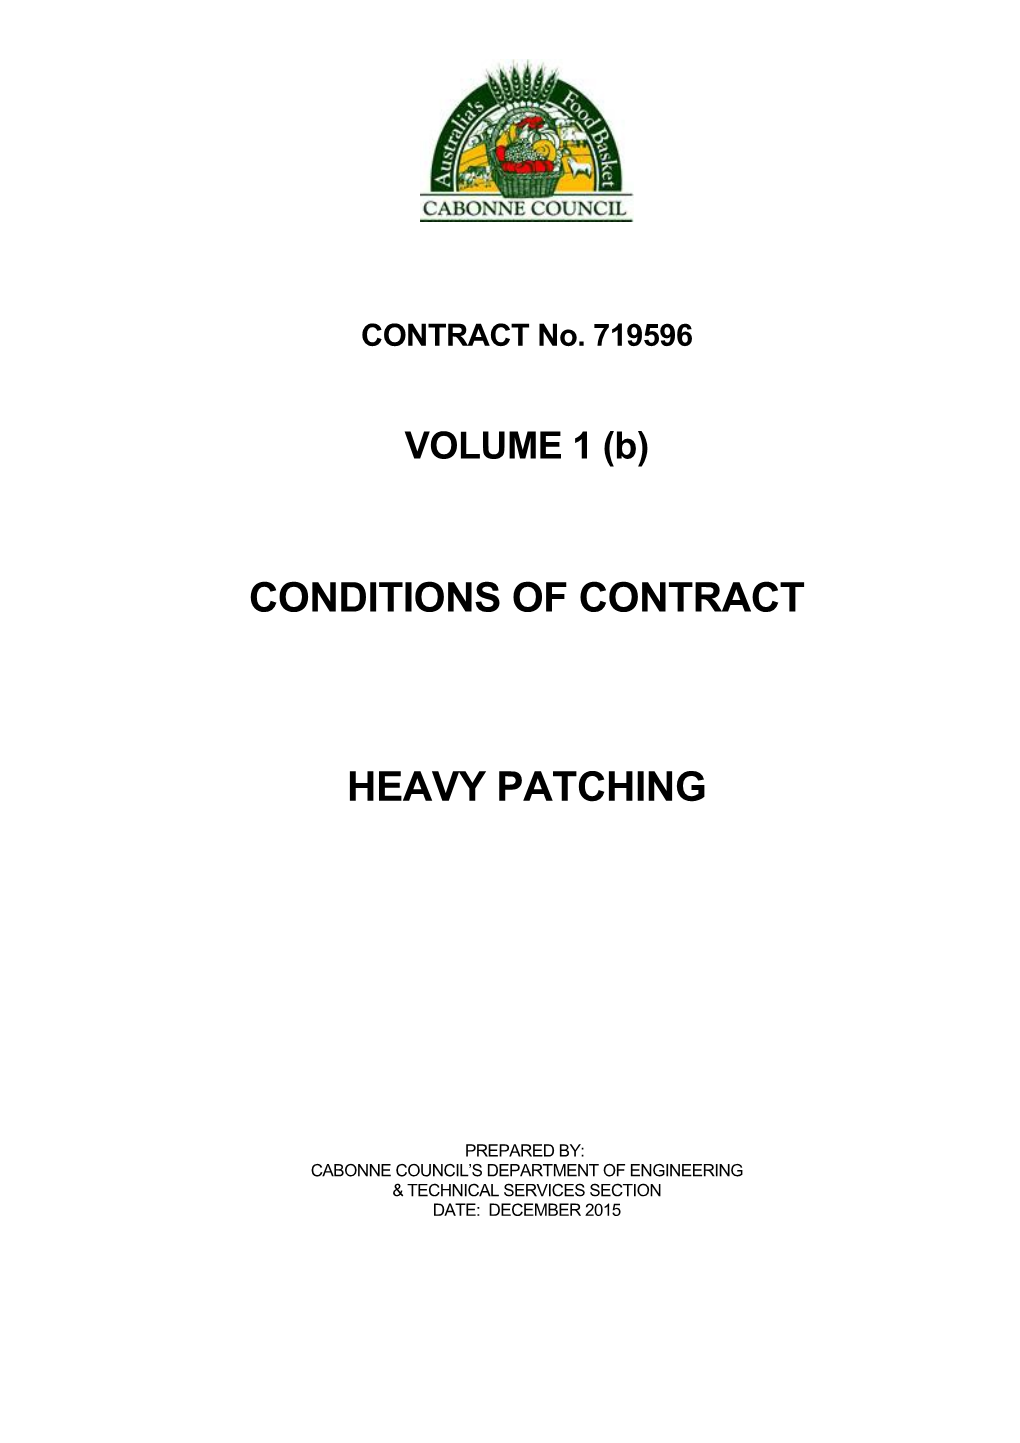 Conditions of Contract s1